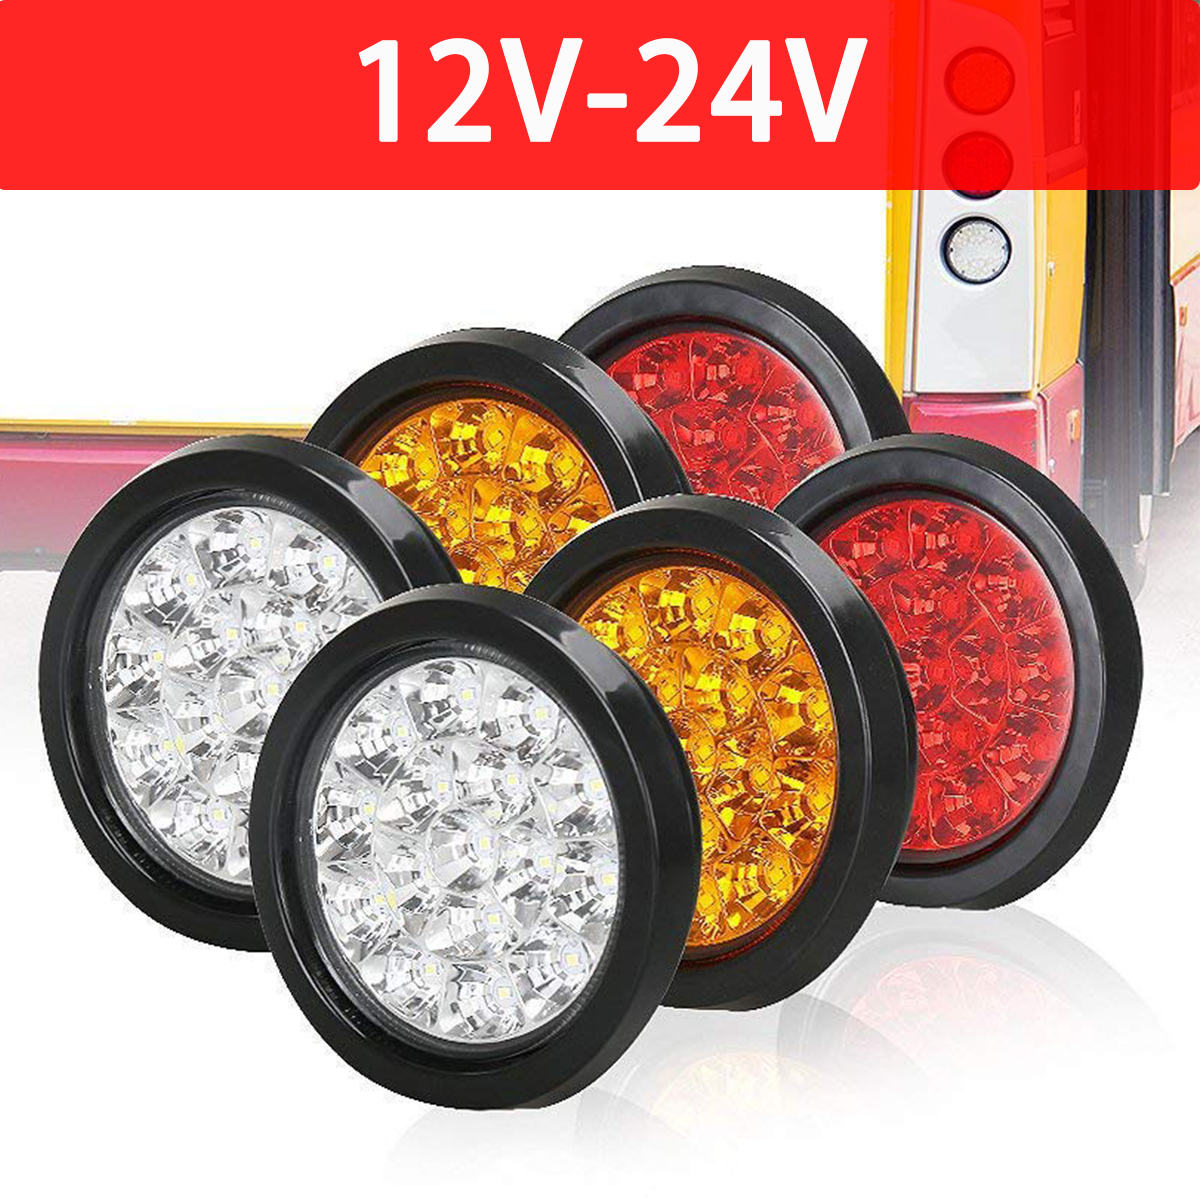 4 Red 2 White LIMICAR 4 LED Trailer Tail Lights Grommet Plug 12 LED Round Stop Turn Signal Stop Brake Trailer Lights for Tractor Truck Bus Lorries RV 